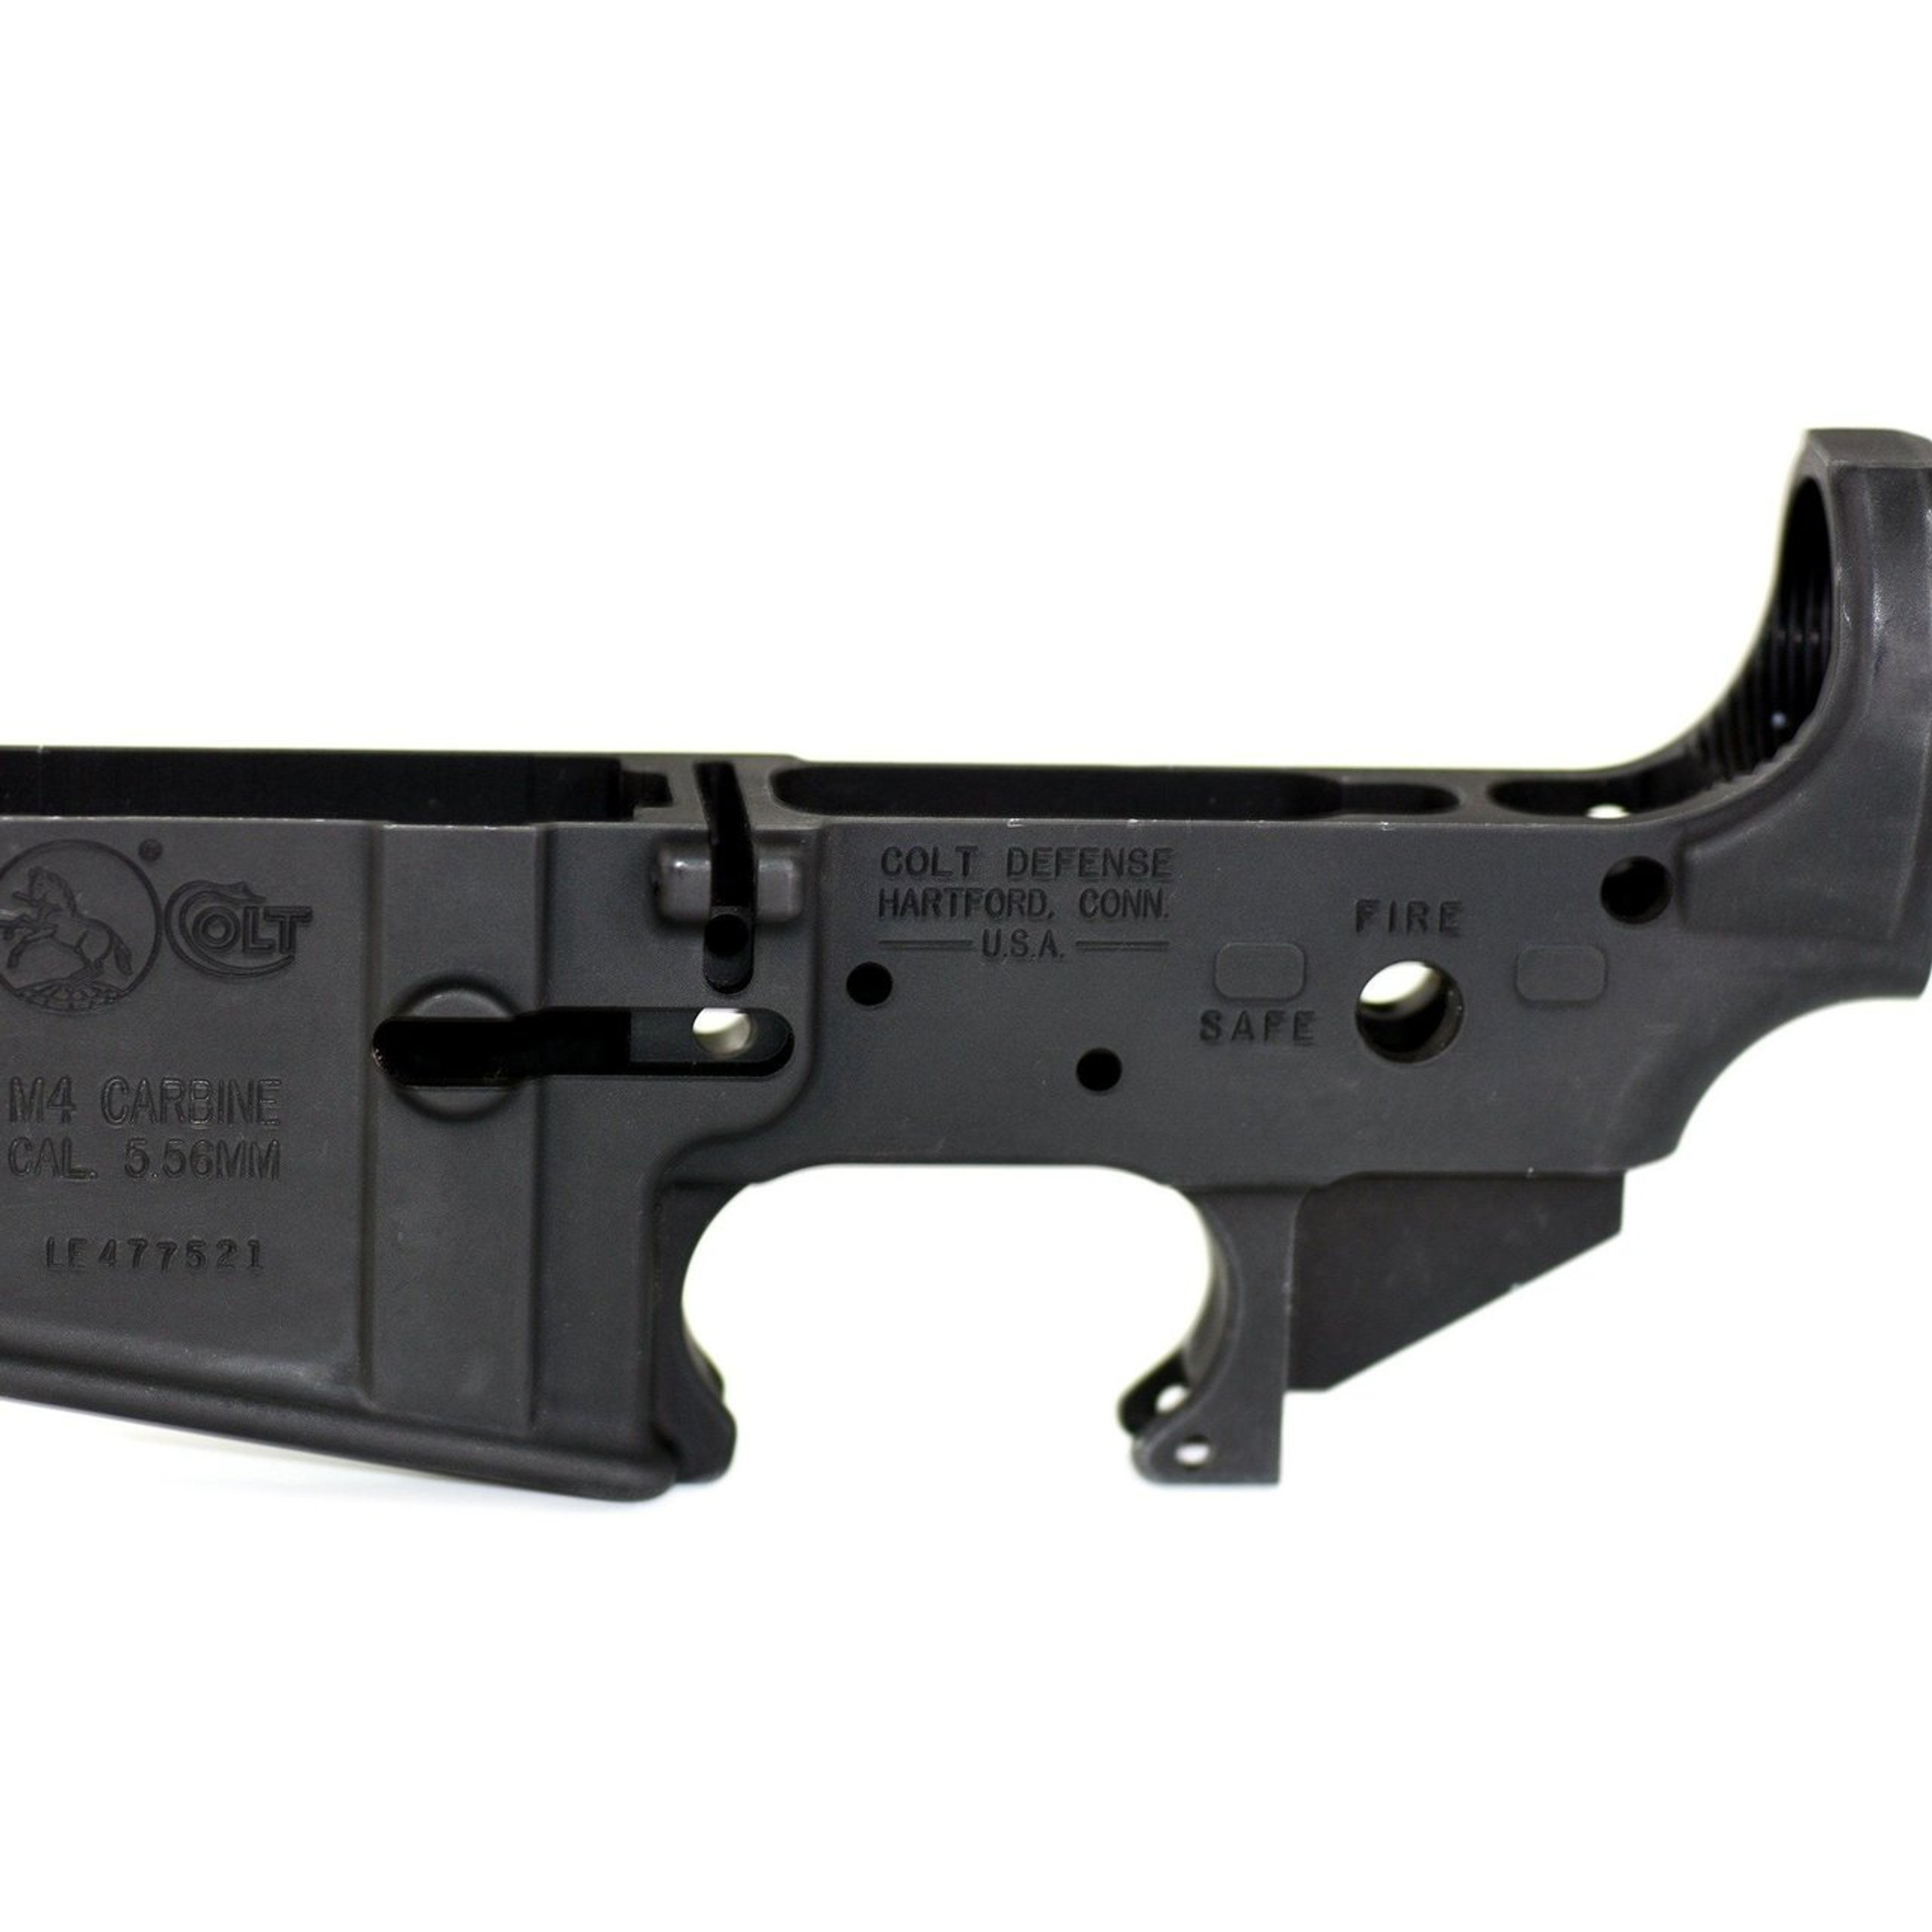 Colt Mexico M4 Carbine Stripped Lower Receiver Virgin